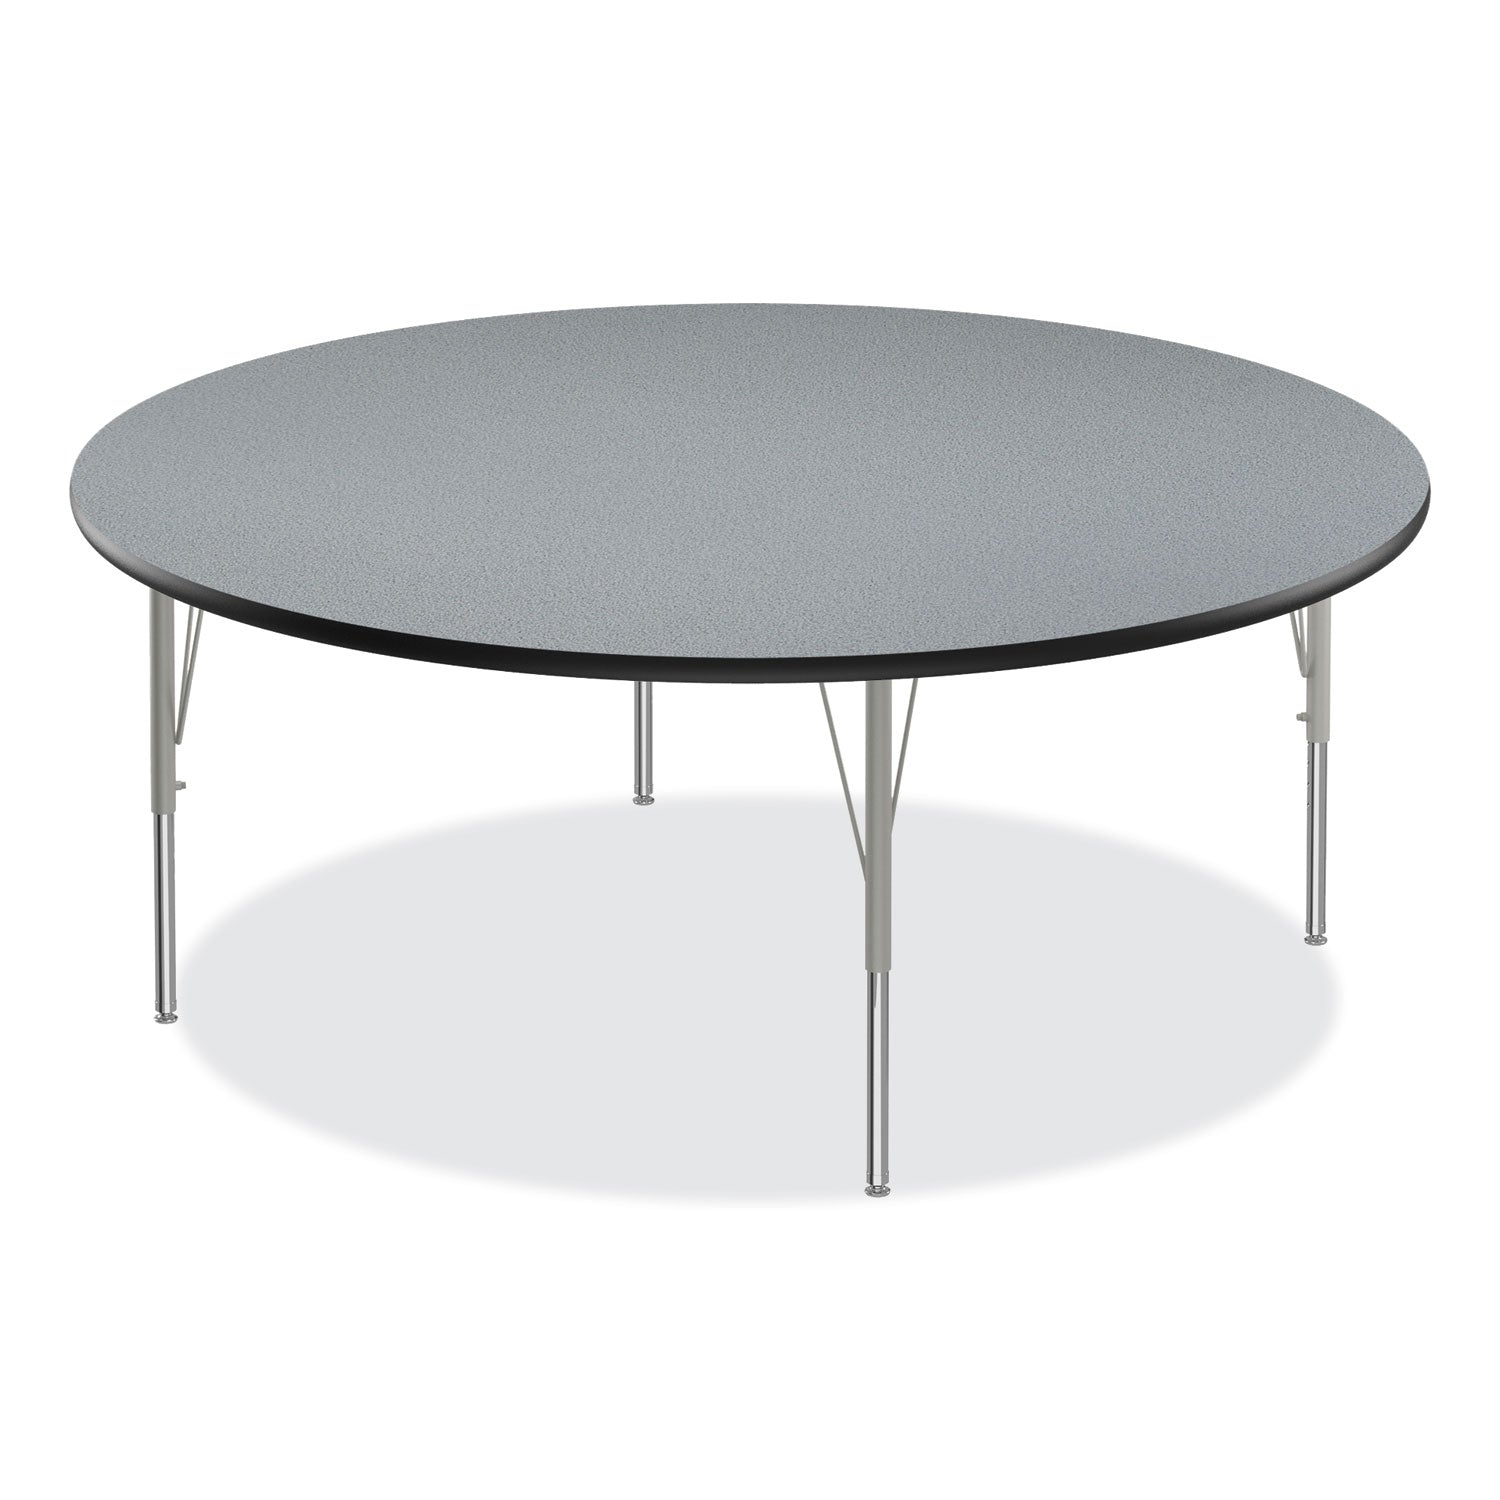 height-adjustable-activity-tables-round-60-x-19-to-29-gray-granite-top-gray-legs-4-pallet-ships-in-4-6-business-days_crl60tfrd15954p - 7